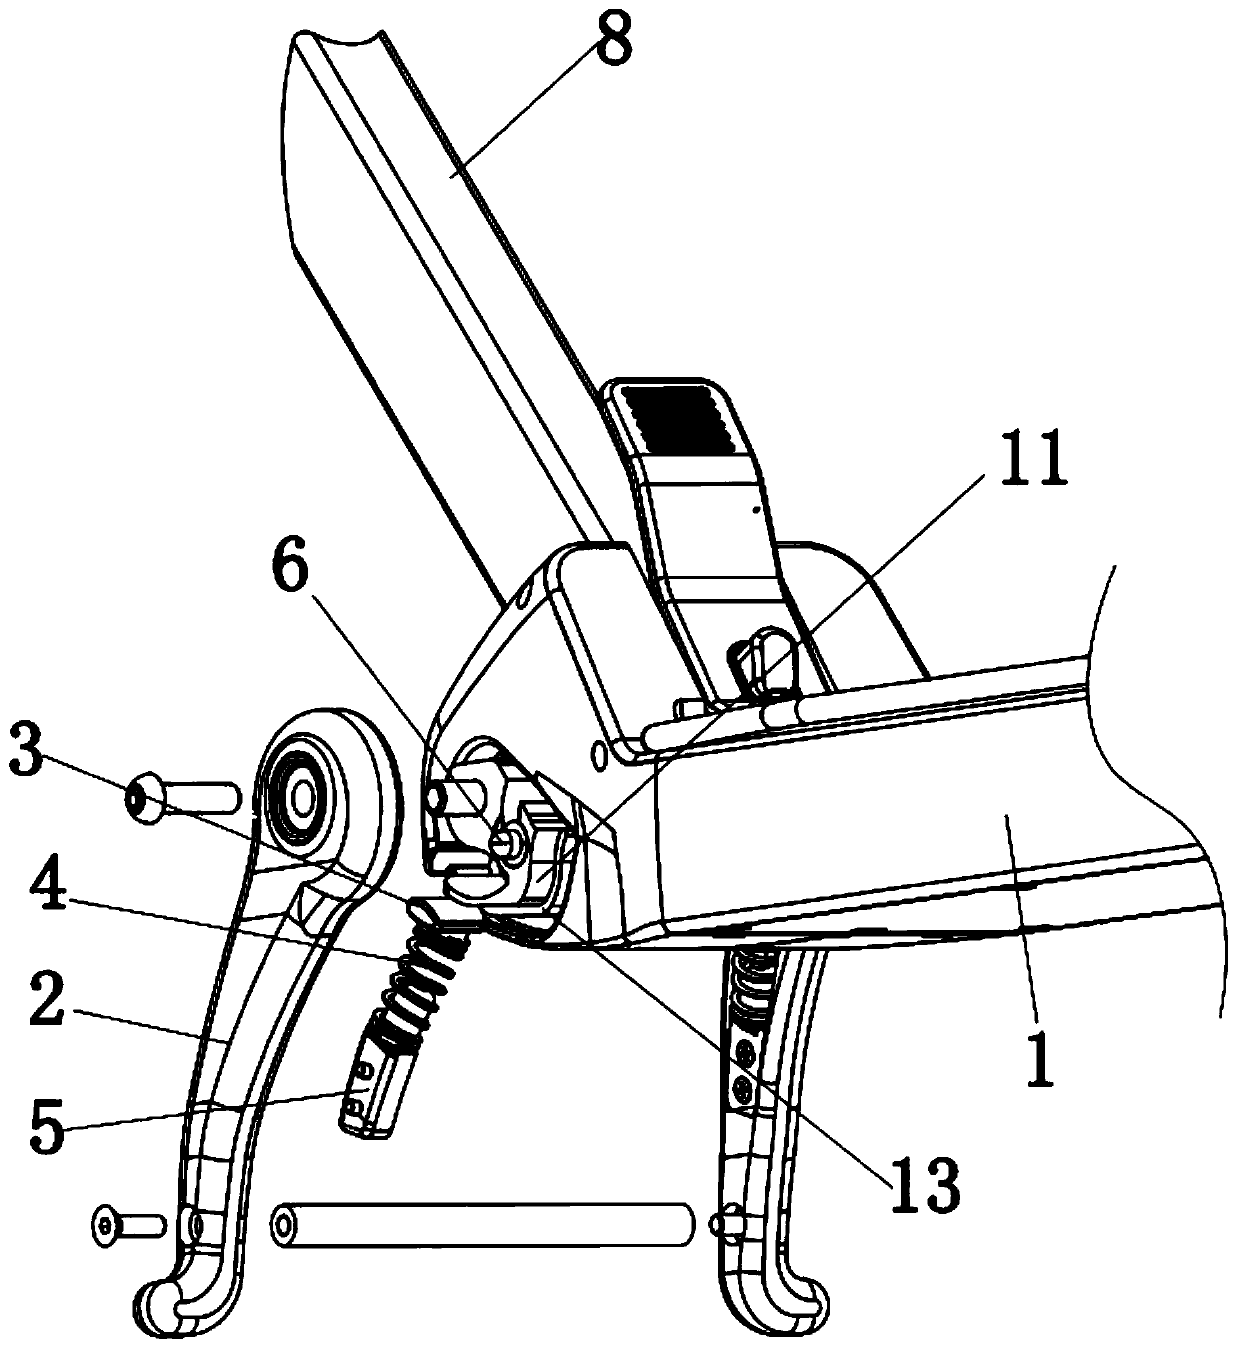 Support structure of electric scooter